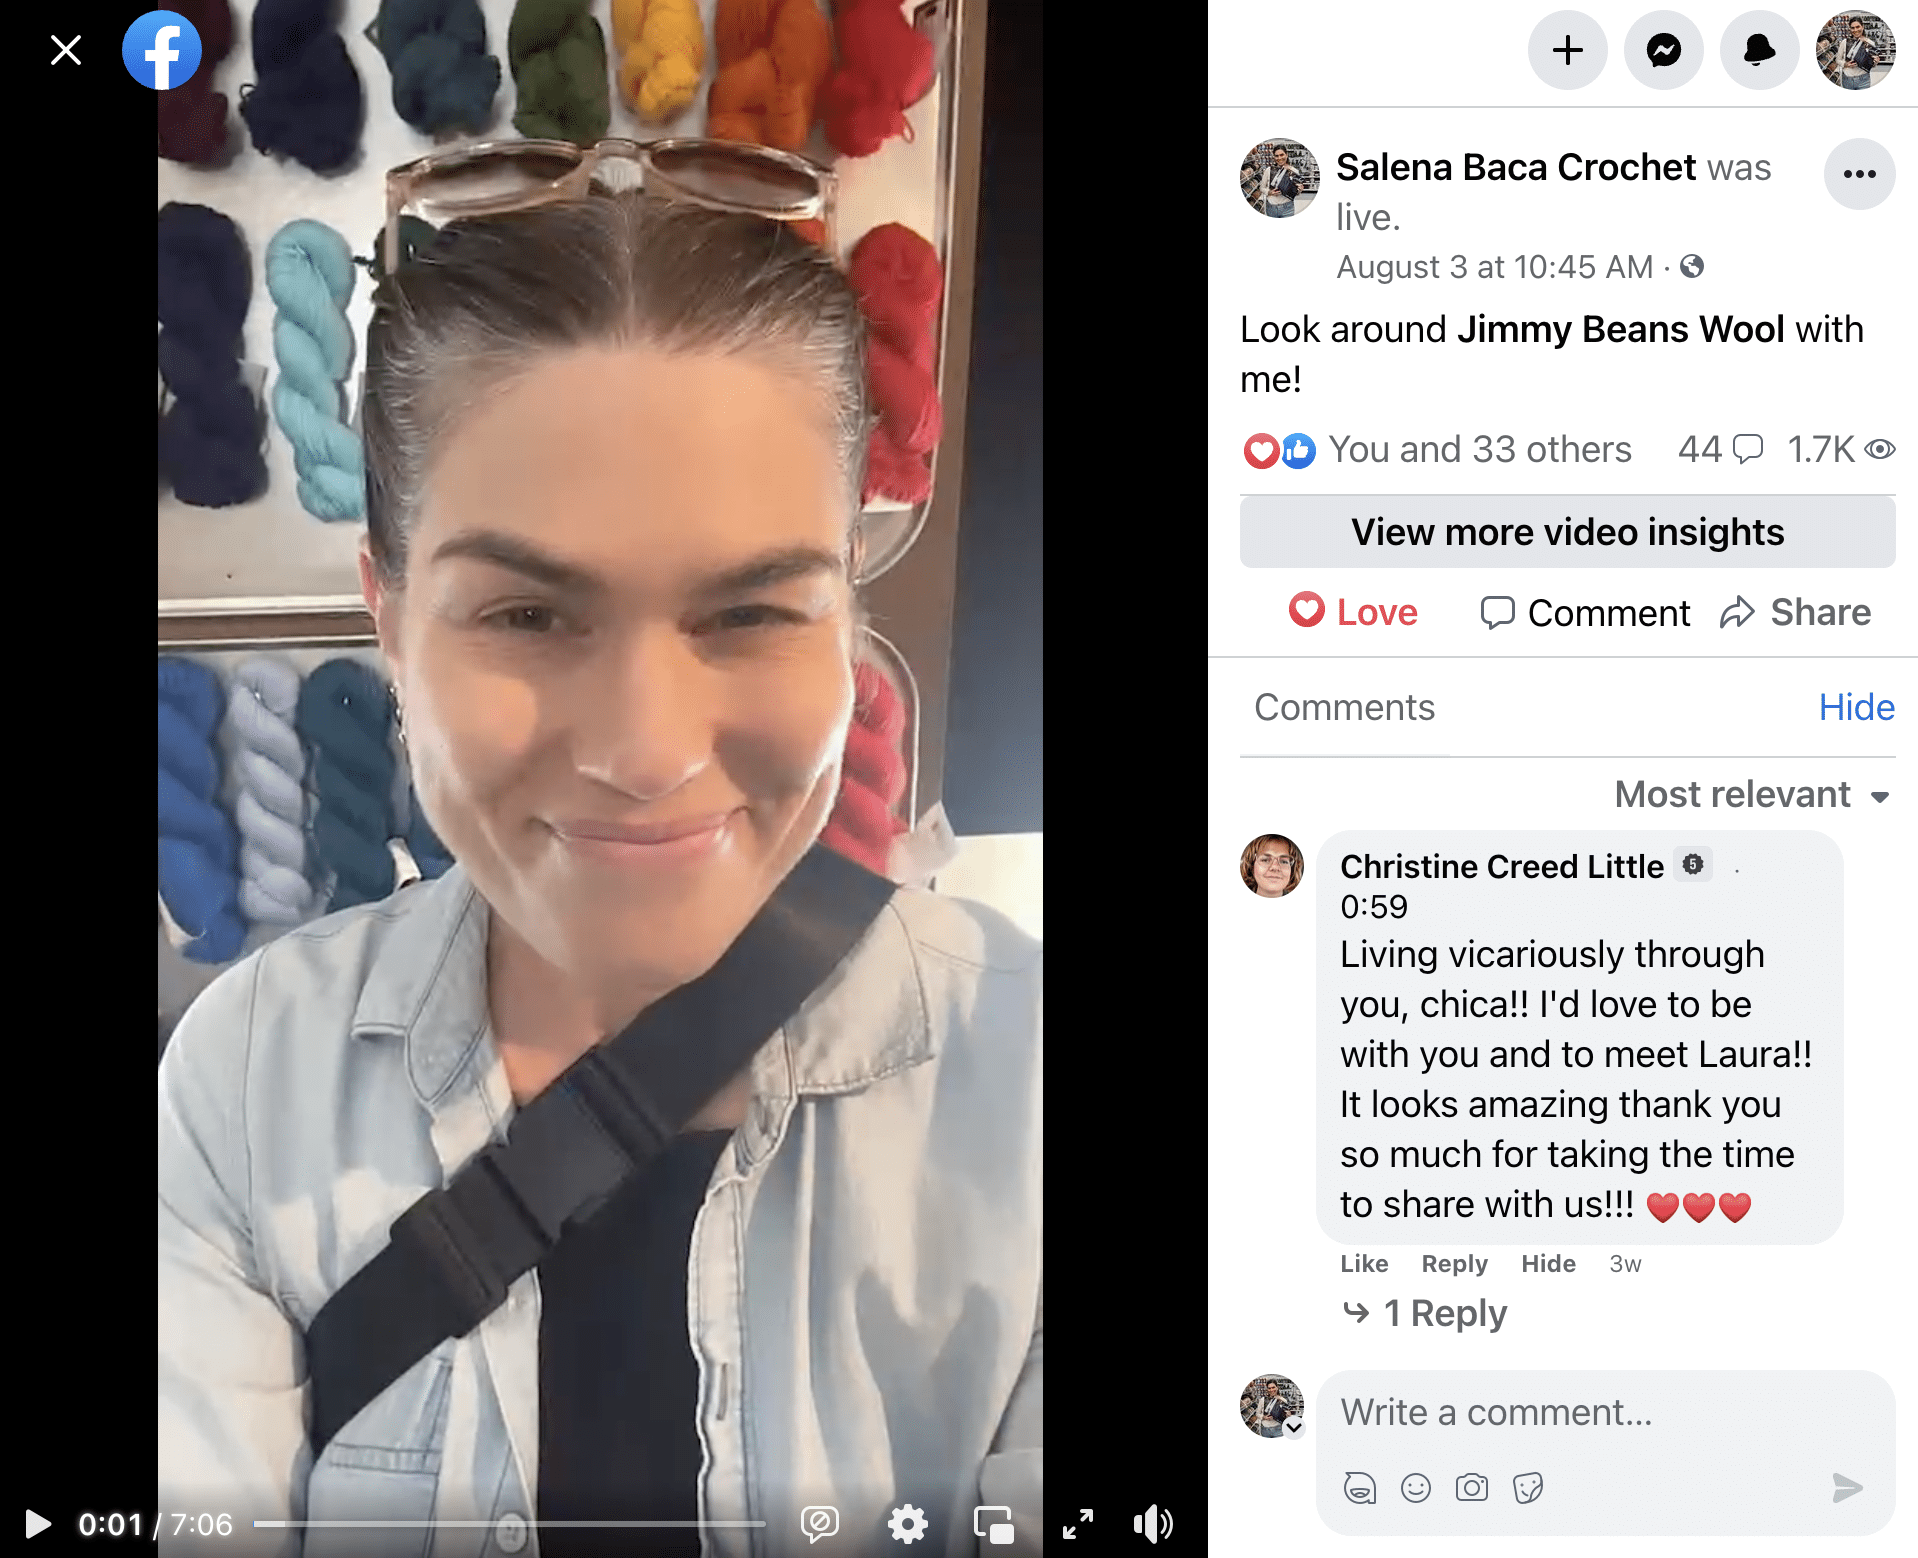 Facebook Live Video - Look around Jimmy Beans Wool yarn store with me!